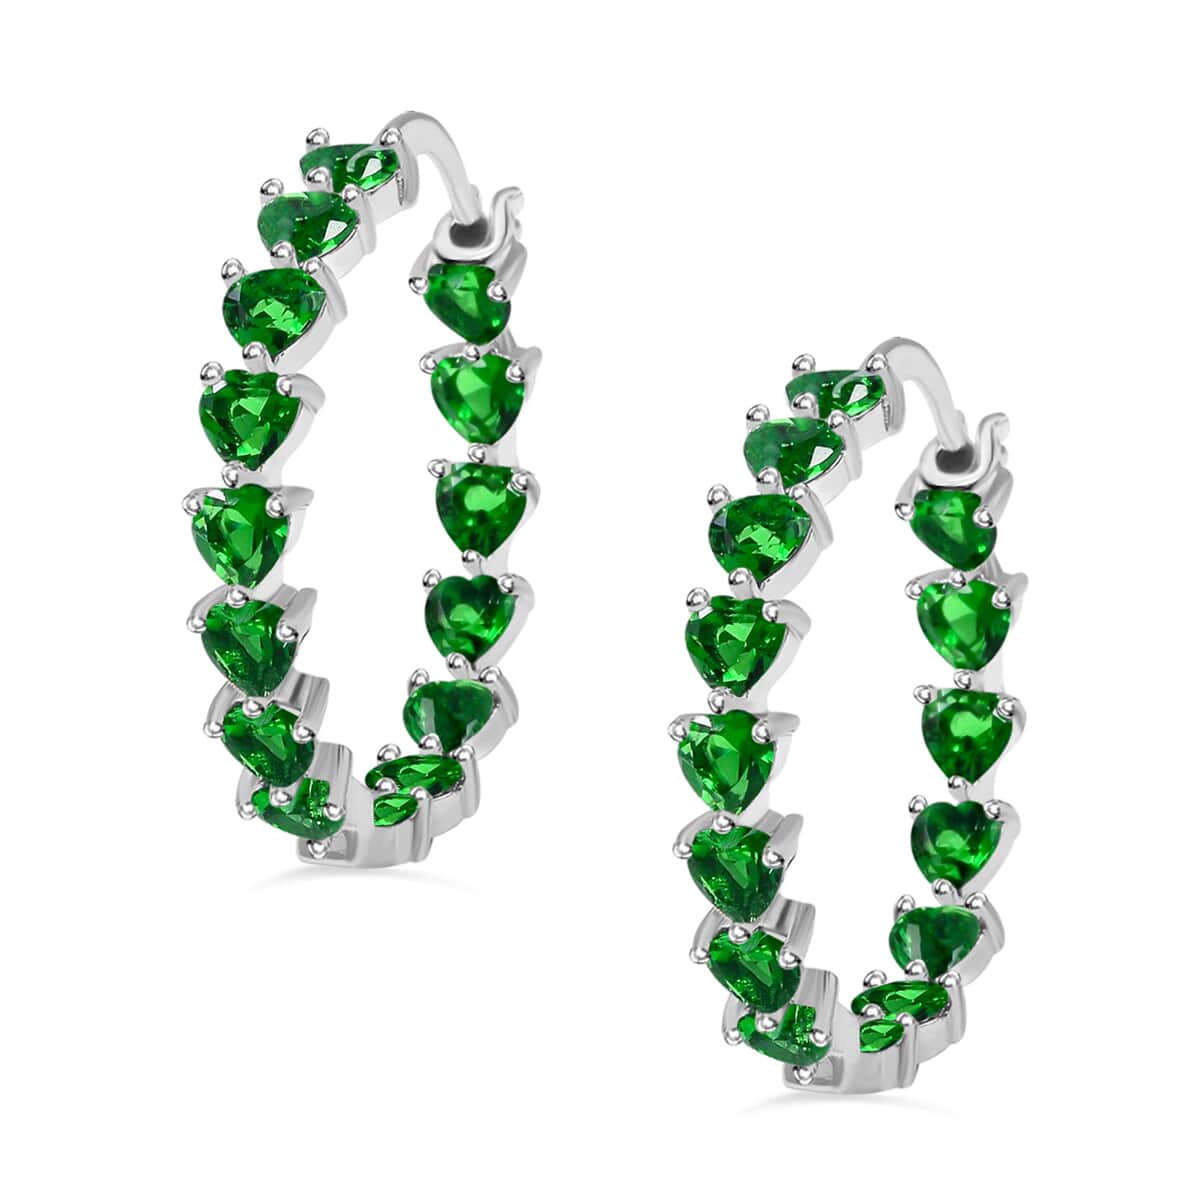 Simulated Green Diamond Earrings in Silvertone, Inside Out Hoops, Simulated Diamond Jewelry For Women image number 5